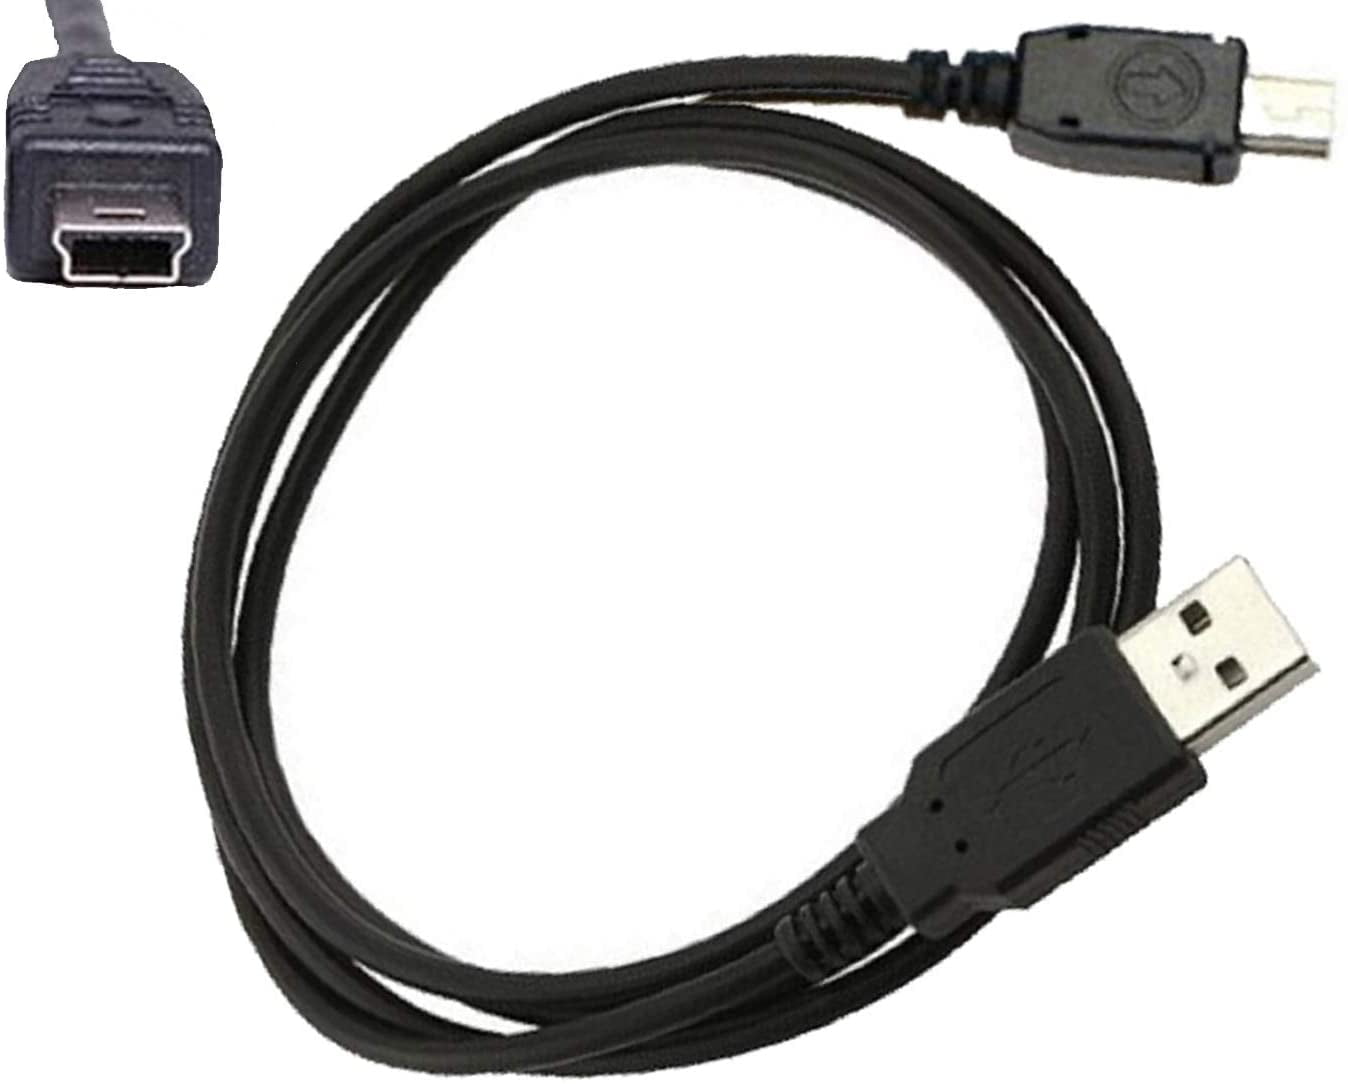 USB Data Cable Cord For Elmo Elm0 1337-164 1337164 MO-1W M0-1W 1336-12 133612 